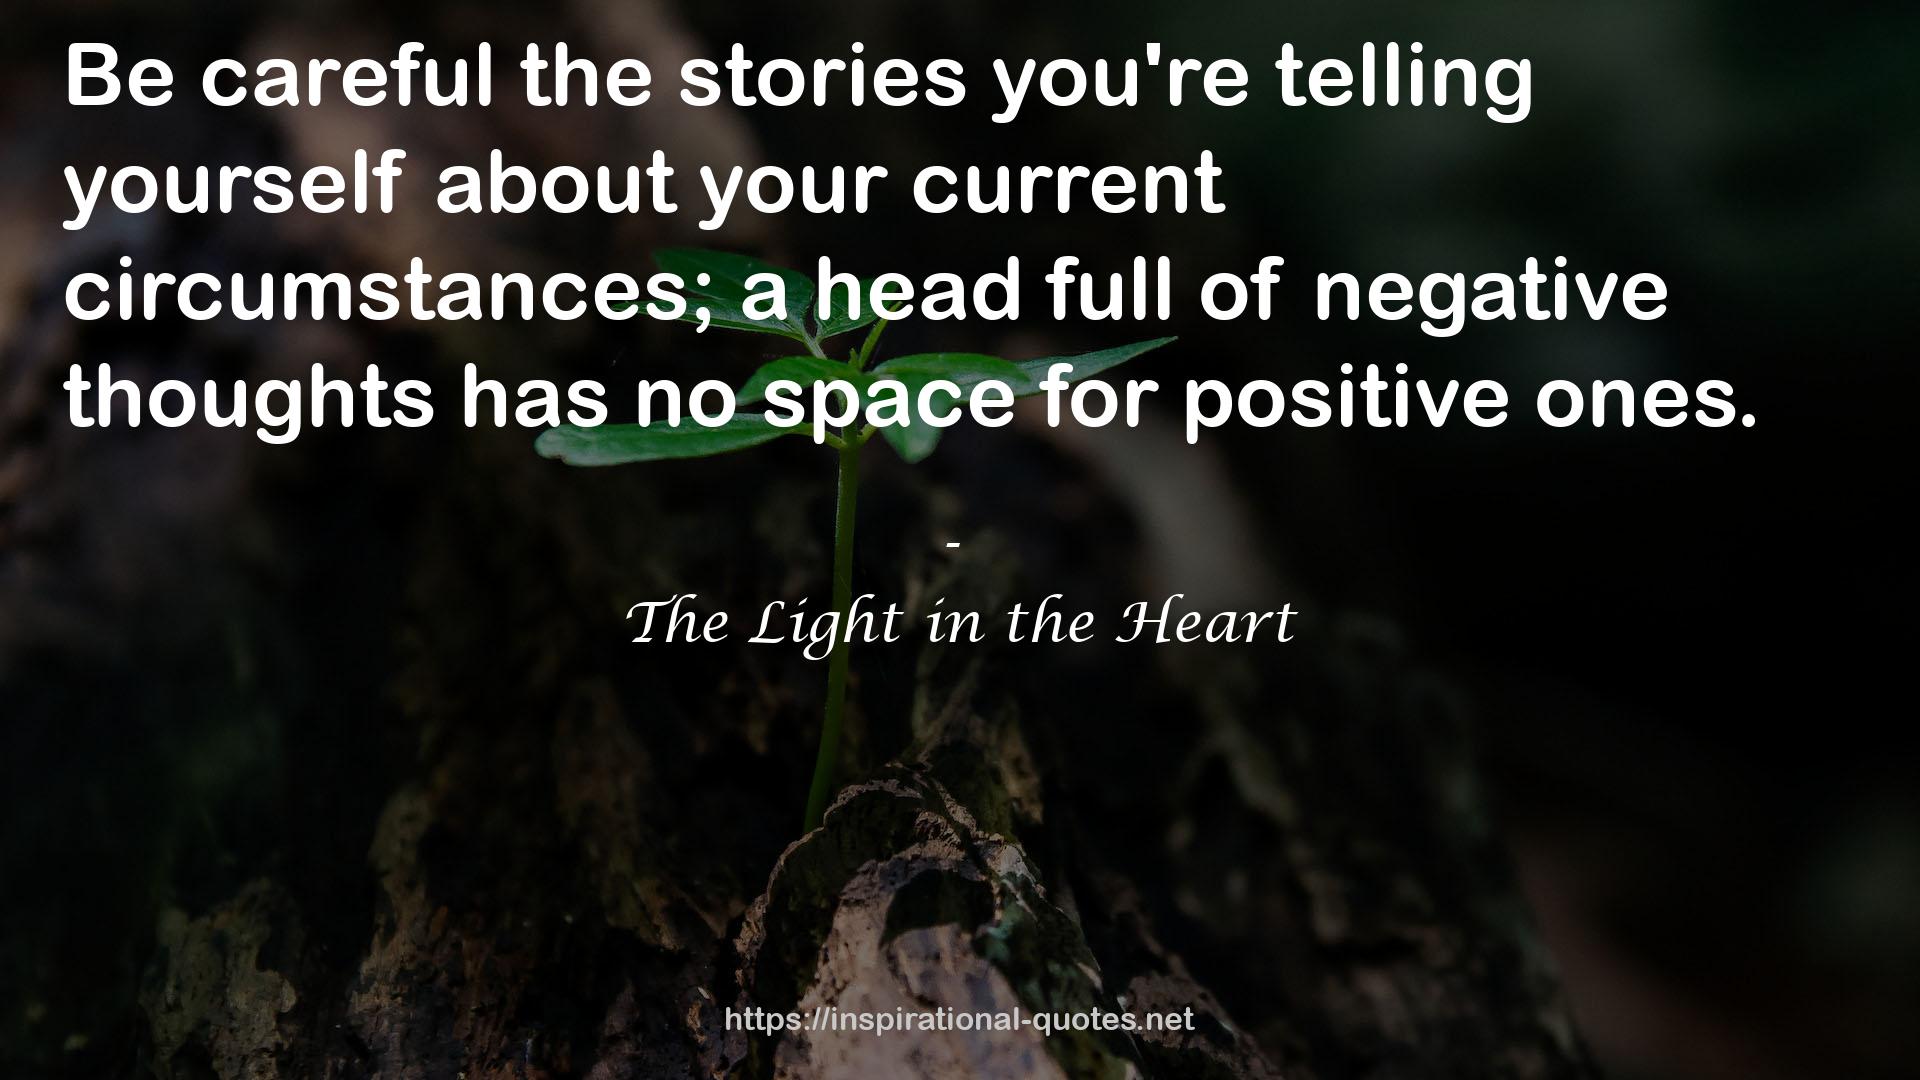 The Light in the Heart QUOTES